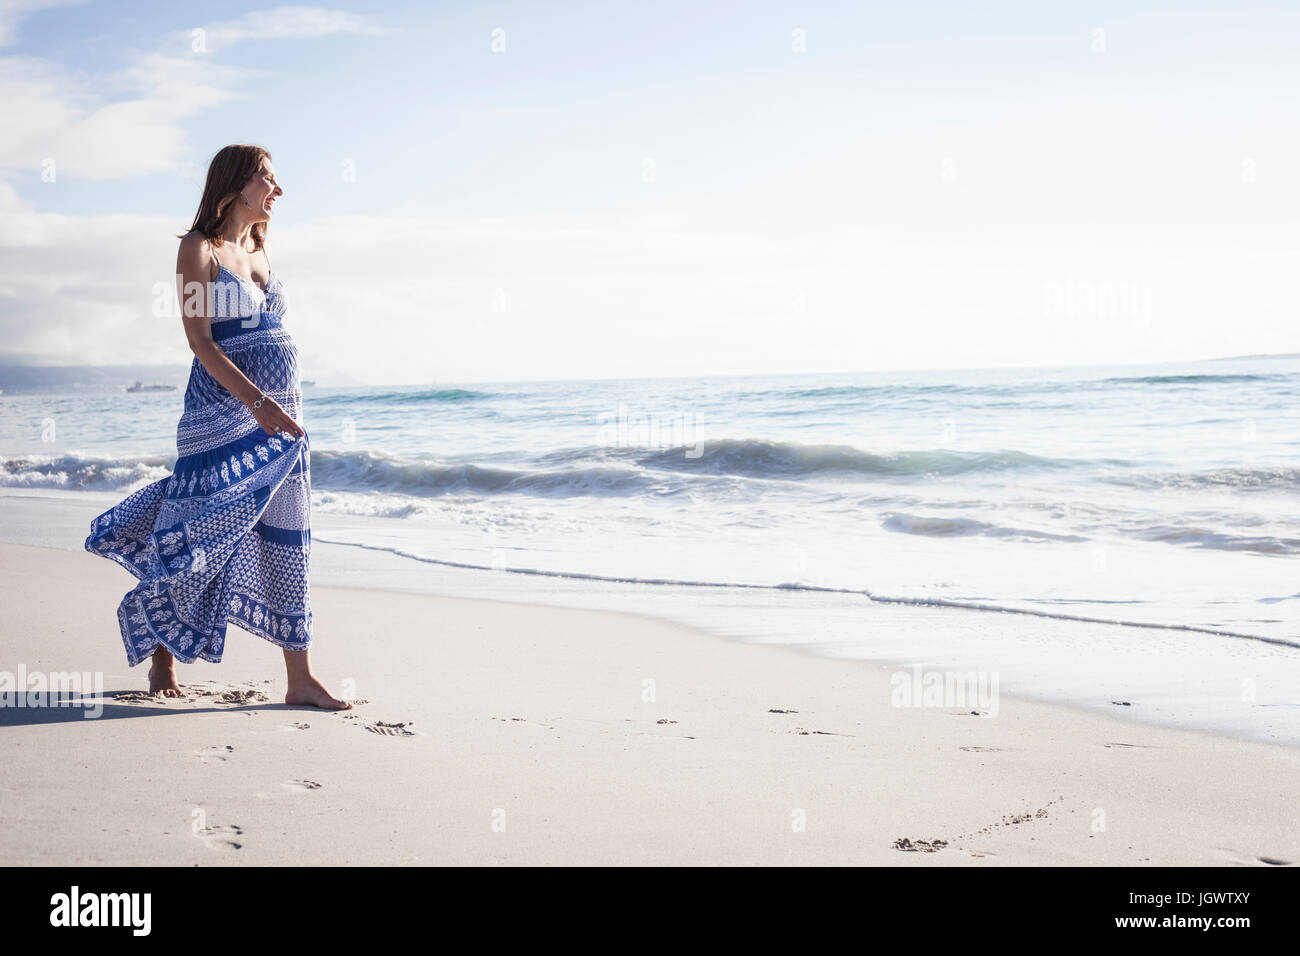 Pregnant woman on beach, Cape Town, South Africa Stock Photo